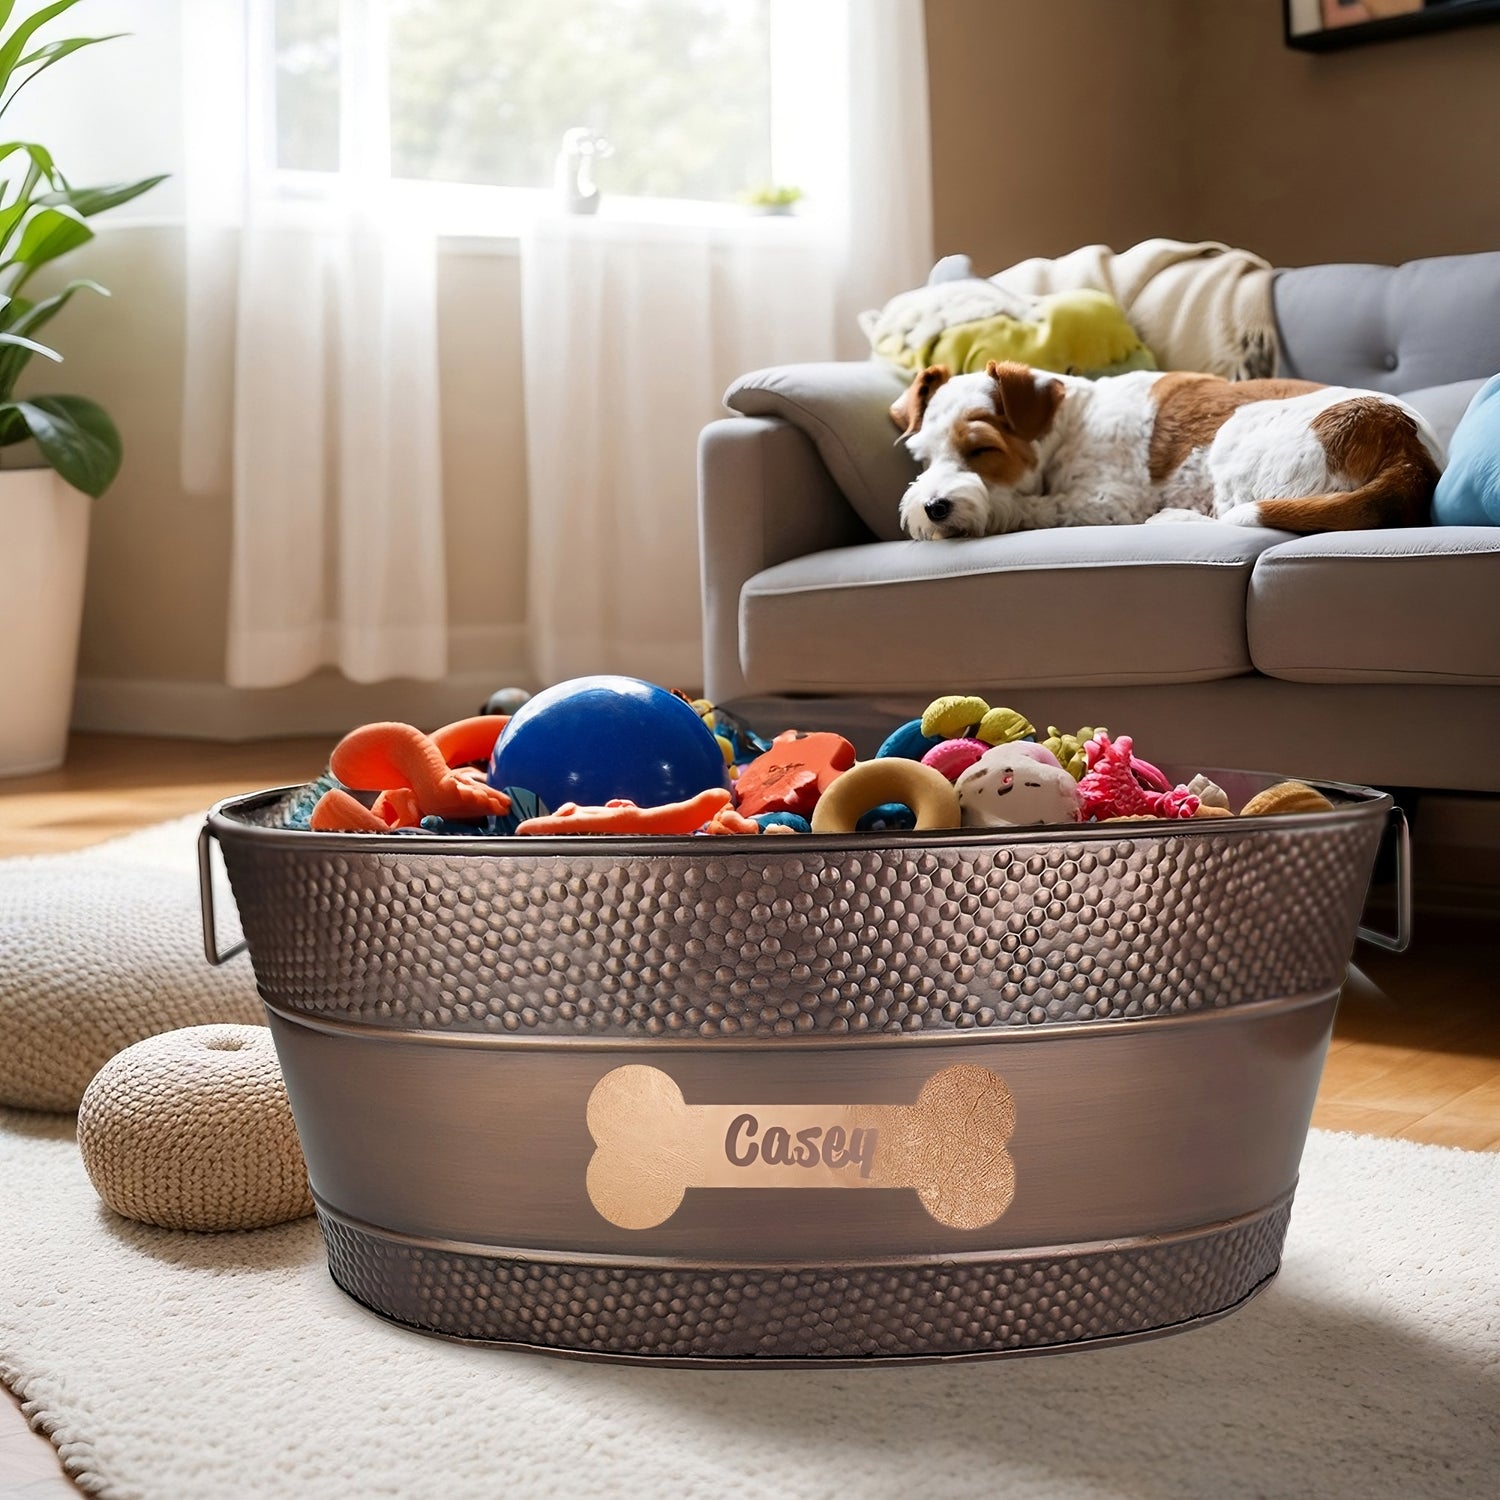 Large dog toy box holds many chew toys, ropes, or balls.  Long lasting galvanized metal.  Copper finish